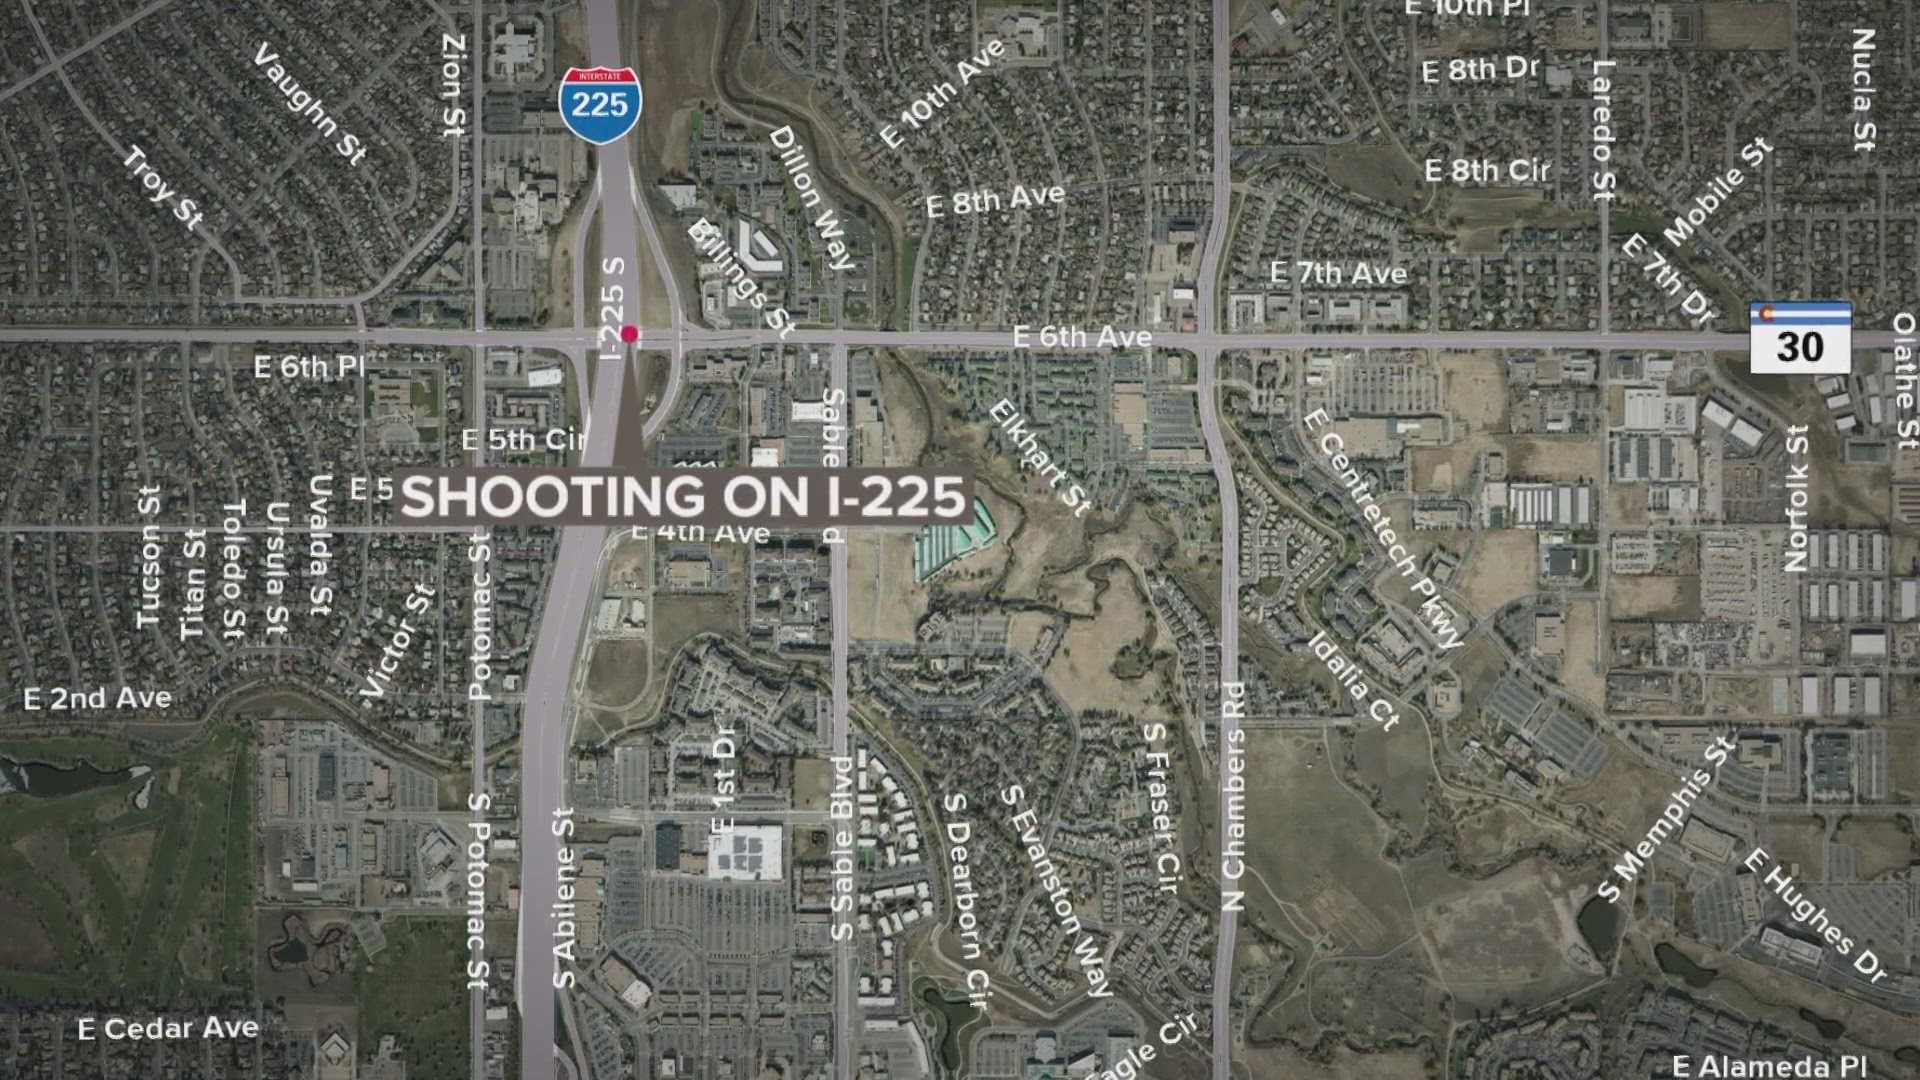 It's unclear what prompted the shooting on northbound I-225 near East 6th Avenue that wounded two people.